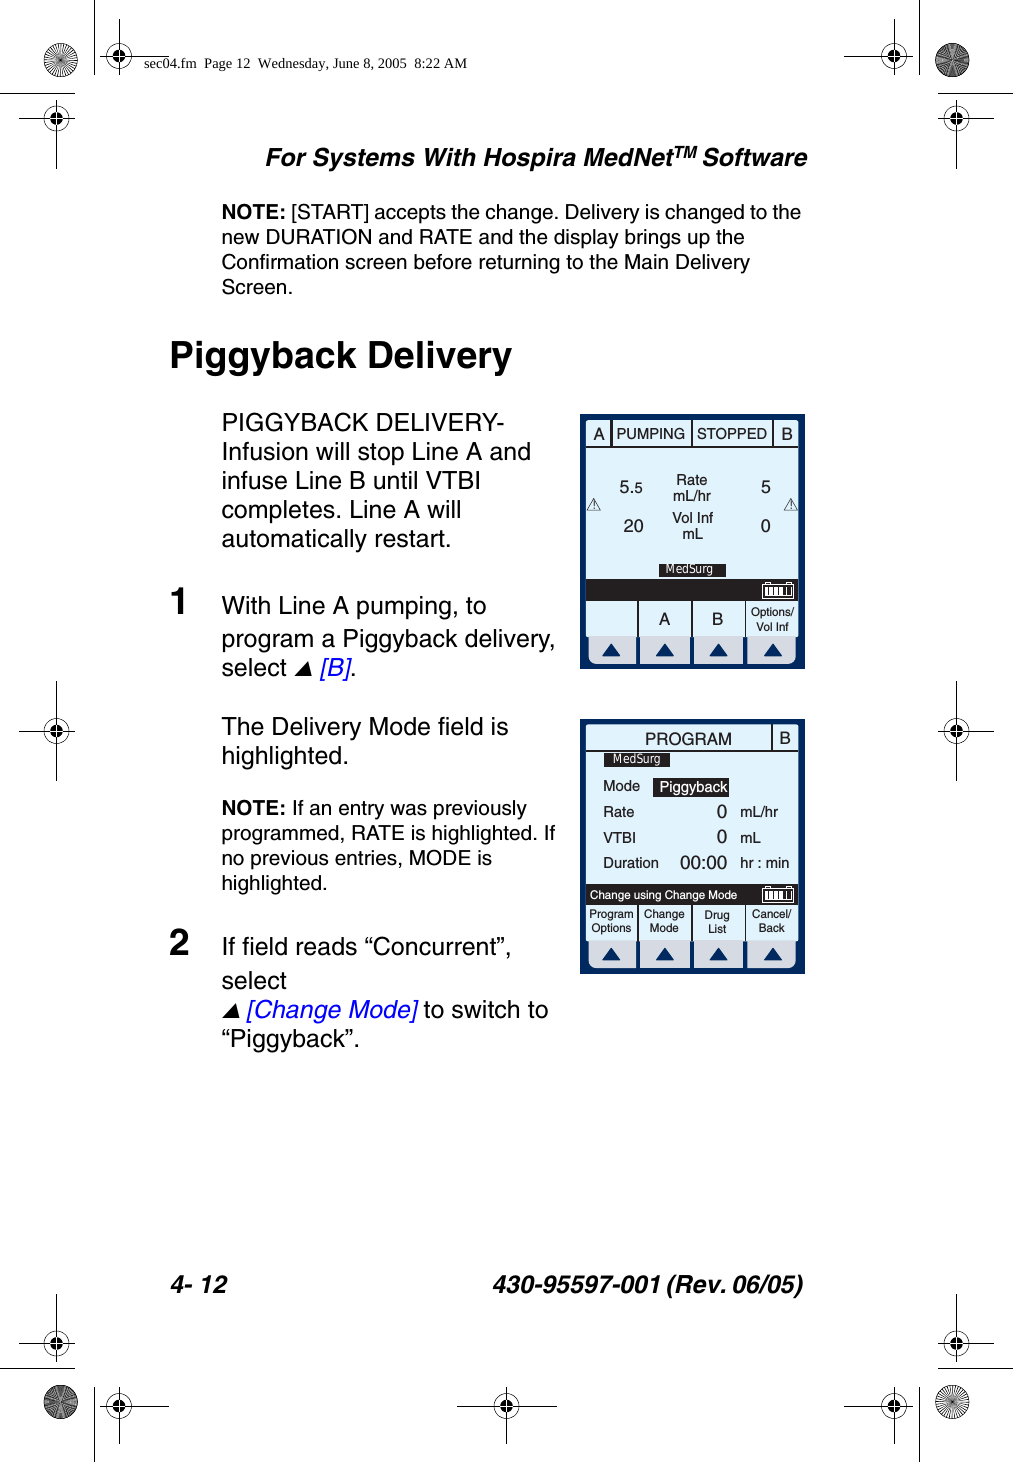 For Systems With Hospira MedNetTM Software4- 12 430-95597-001 (Rev. 06/05) NOTE: [START] accepts the change. Delivery is changed to the new DURATION and RATE and the display brings up the Confirmation screen before returning to the Main Delivery Screen.Piggyback DeliveryPIGGYBACK DELIVERY- Infusion will stop Line A and infuse Line B until VTBI completes. Line A will automatically restart.1With Line A pumping, to program a Piggyback delivery, select  [B].The Delivery Mode field is highlighted. NOTE: If an entry was previously programmed, RATE is highlighted. If no previous entries, MODE is highlighted.2If field reads “Concurrent”, select  [Change Mode] to switch to “Piggyback”.AABBPUMPING STOPPEDRatemL/hrVol InfmLOptions/Vol Inf5.520 05! !MedSurgBPROGRAMModeRateVTBIDurationmL/hrmLhr : minProgramOptionsChangeModeCancel/BackChange using Change ModePiggyback0000:00MedSurgDrug Listsec04.fm  Page 12  Wednesday, June 8, 2005  8:22 AM